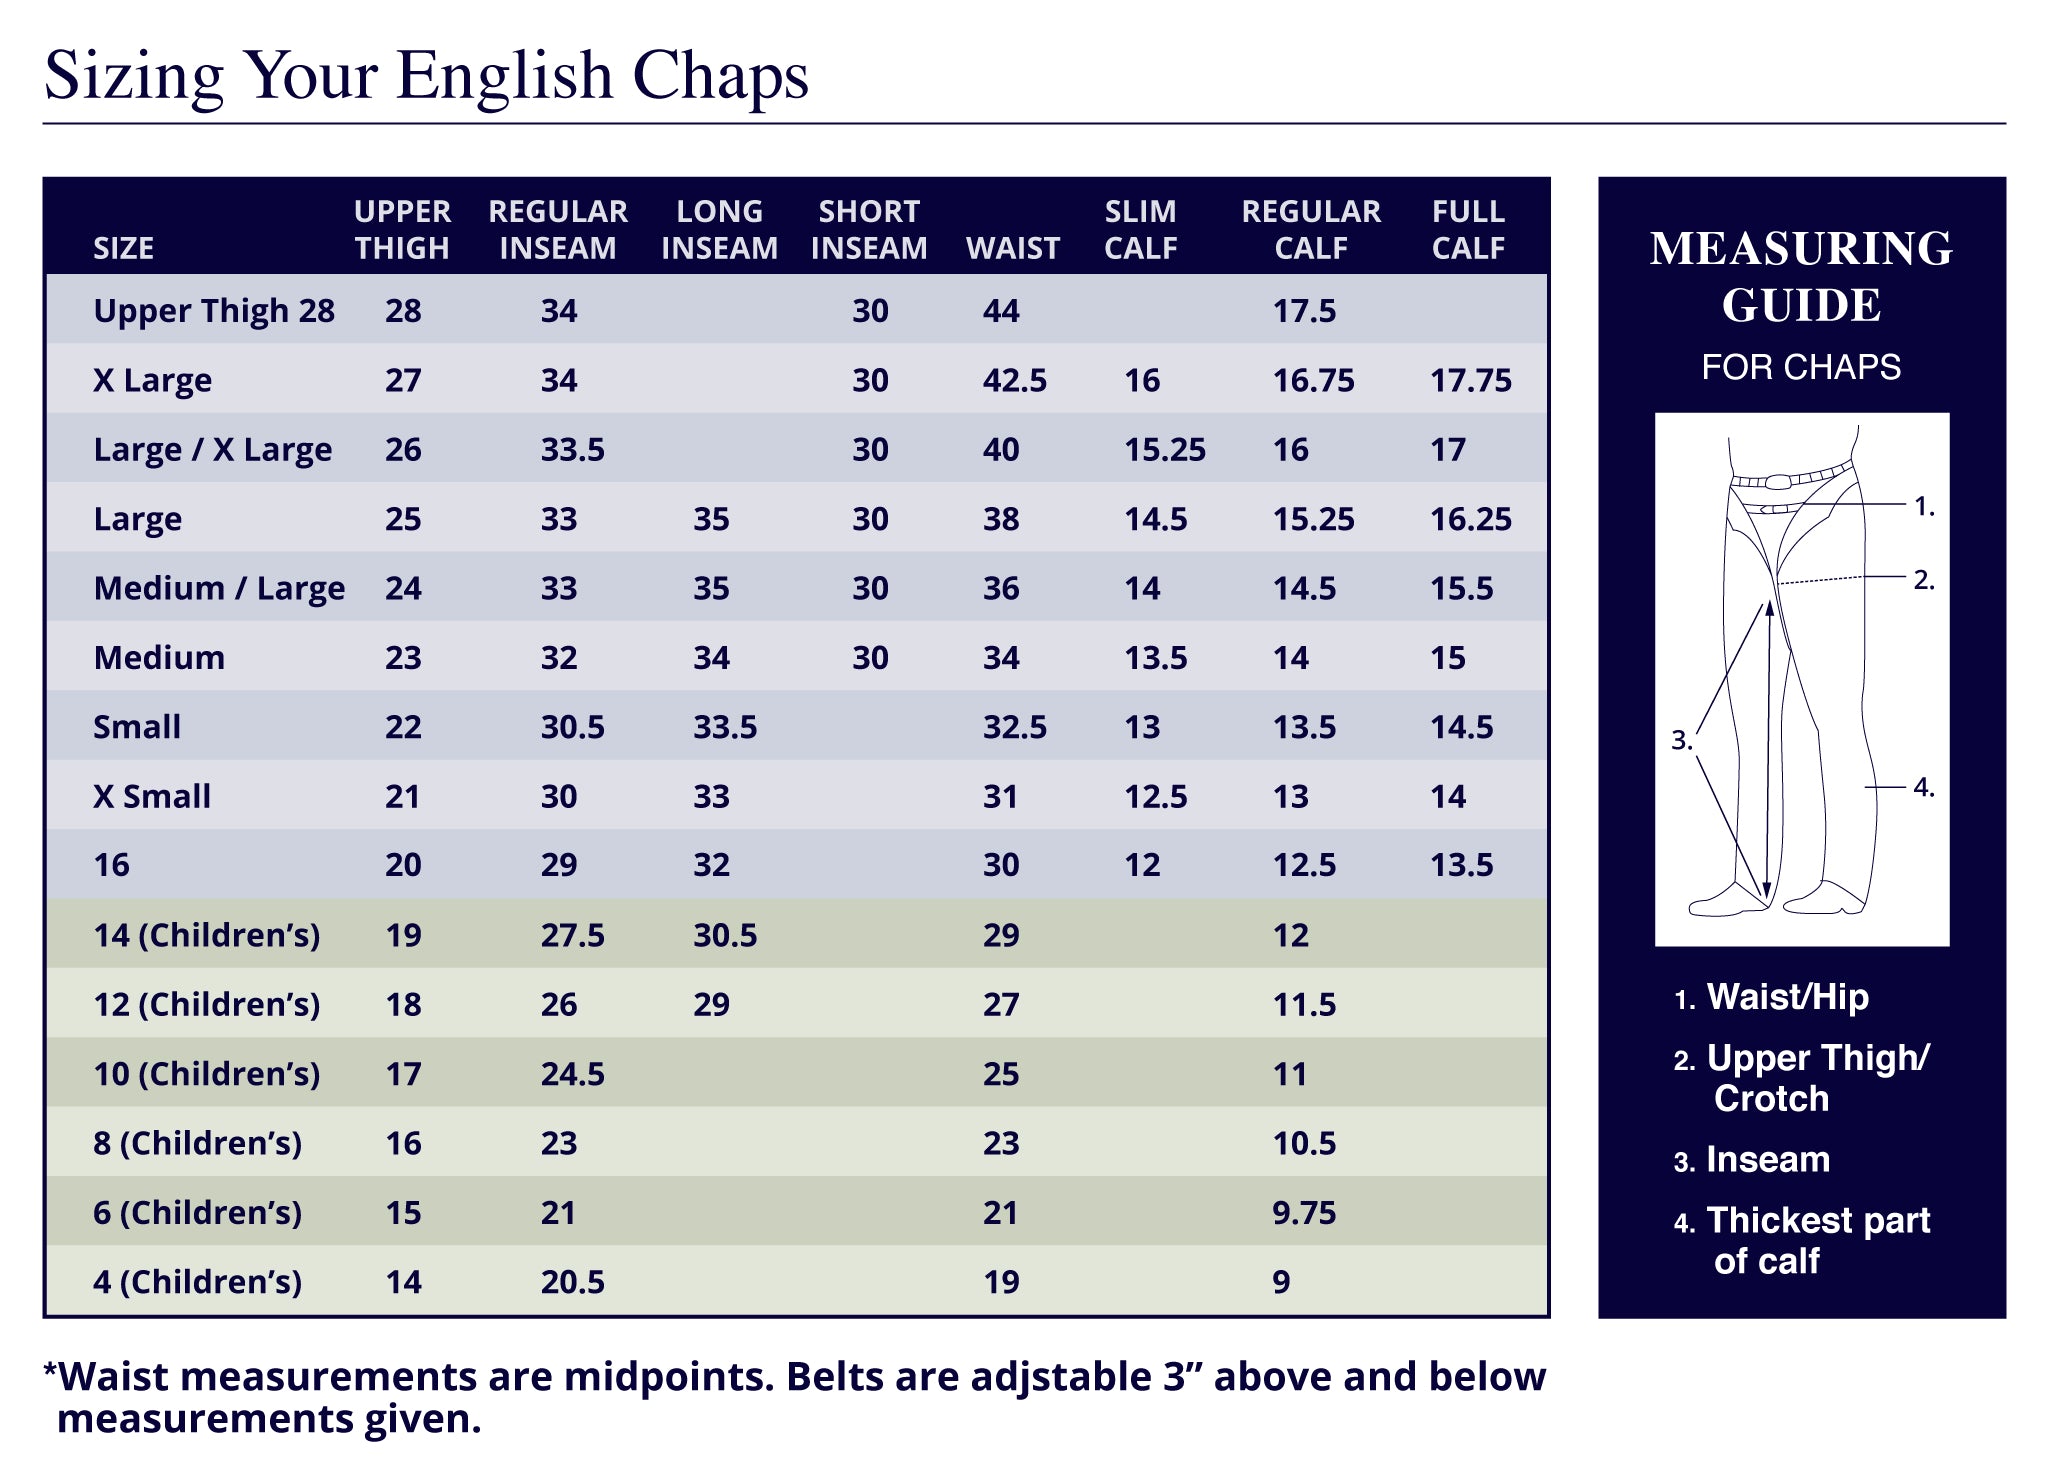 Barnstable Ridings English Schooling Chaps Size Guide